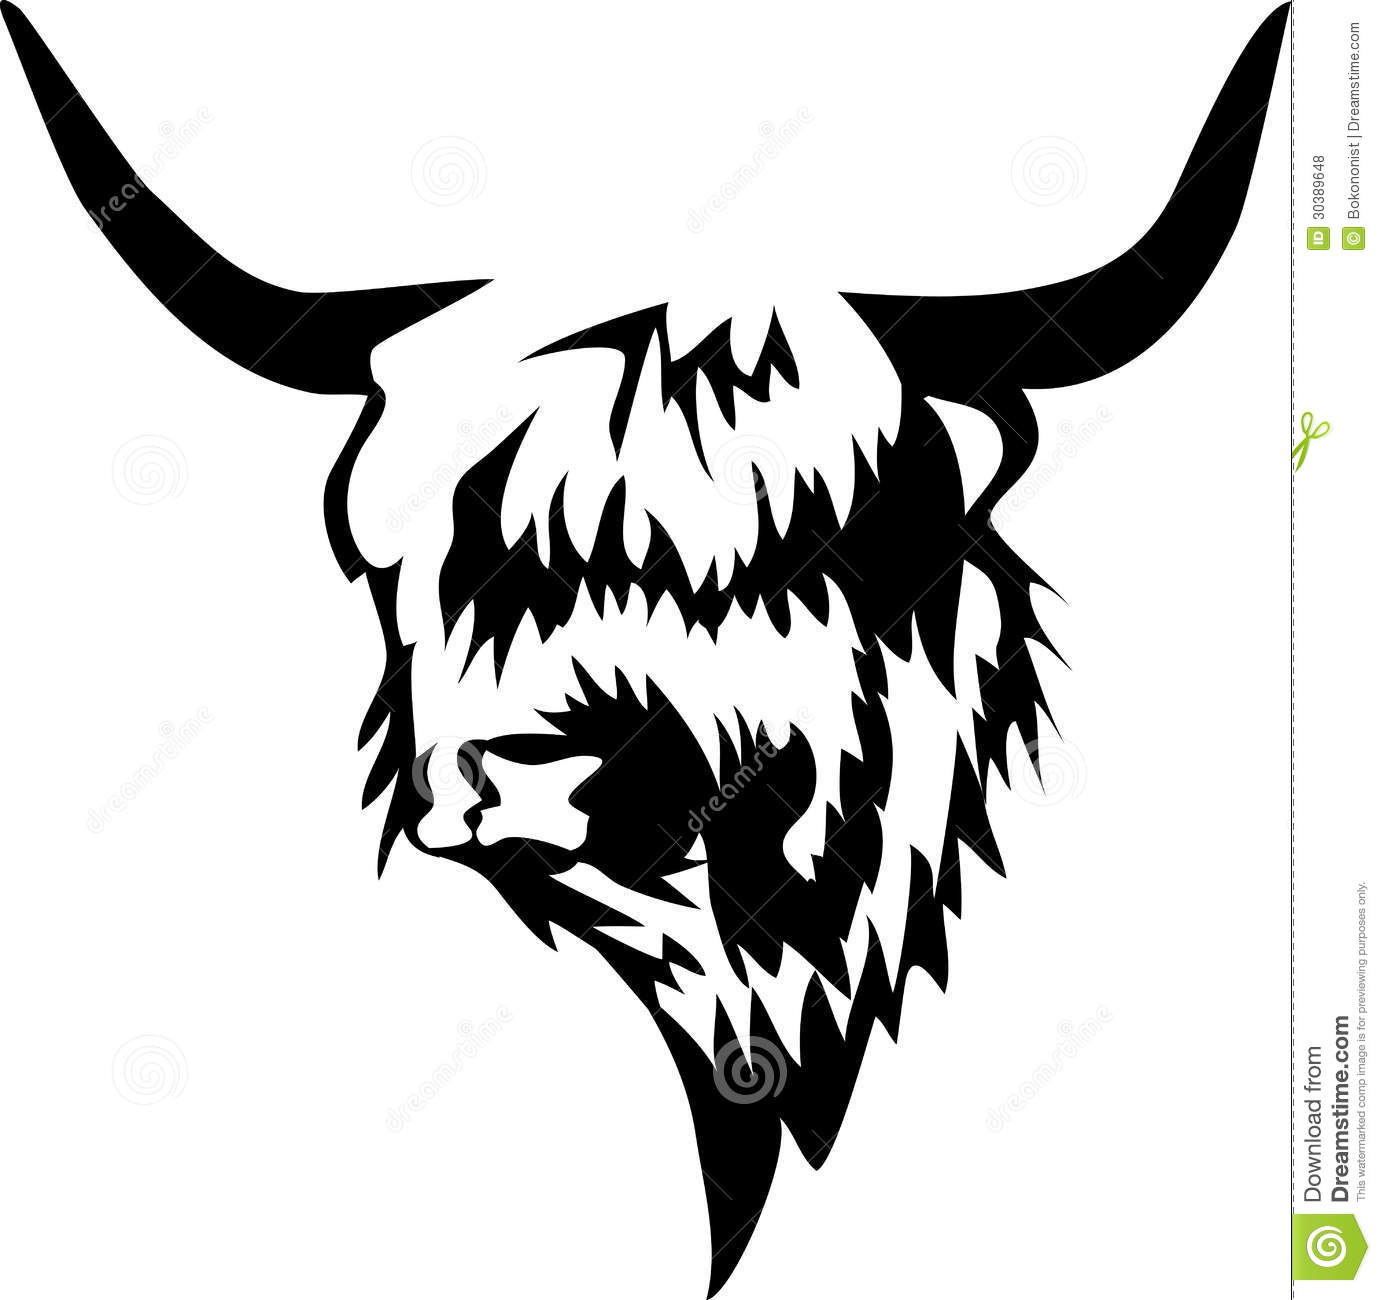 Highland Cattle clipart #20, Download drawings